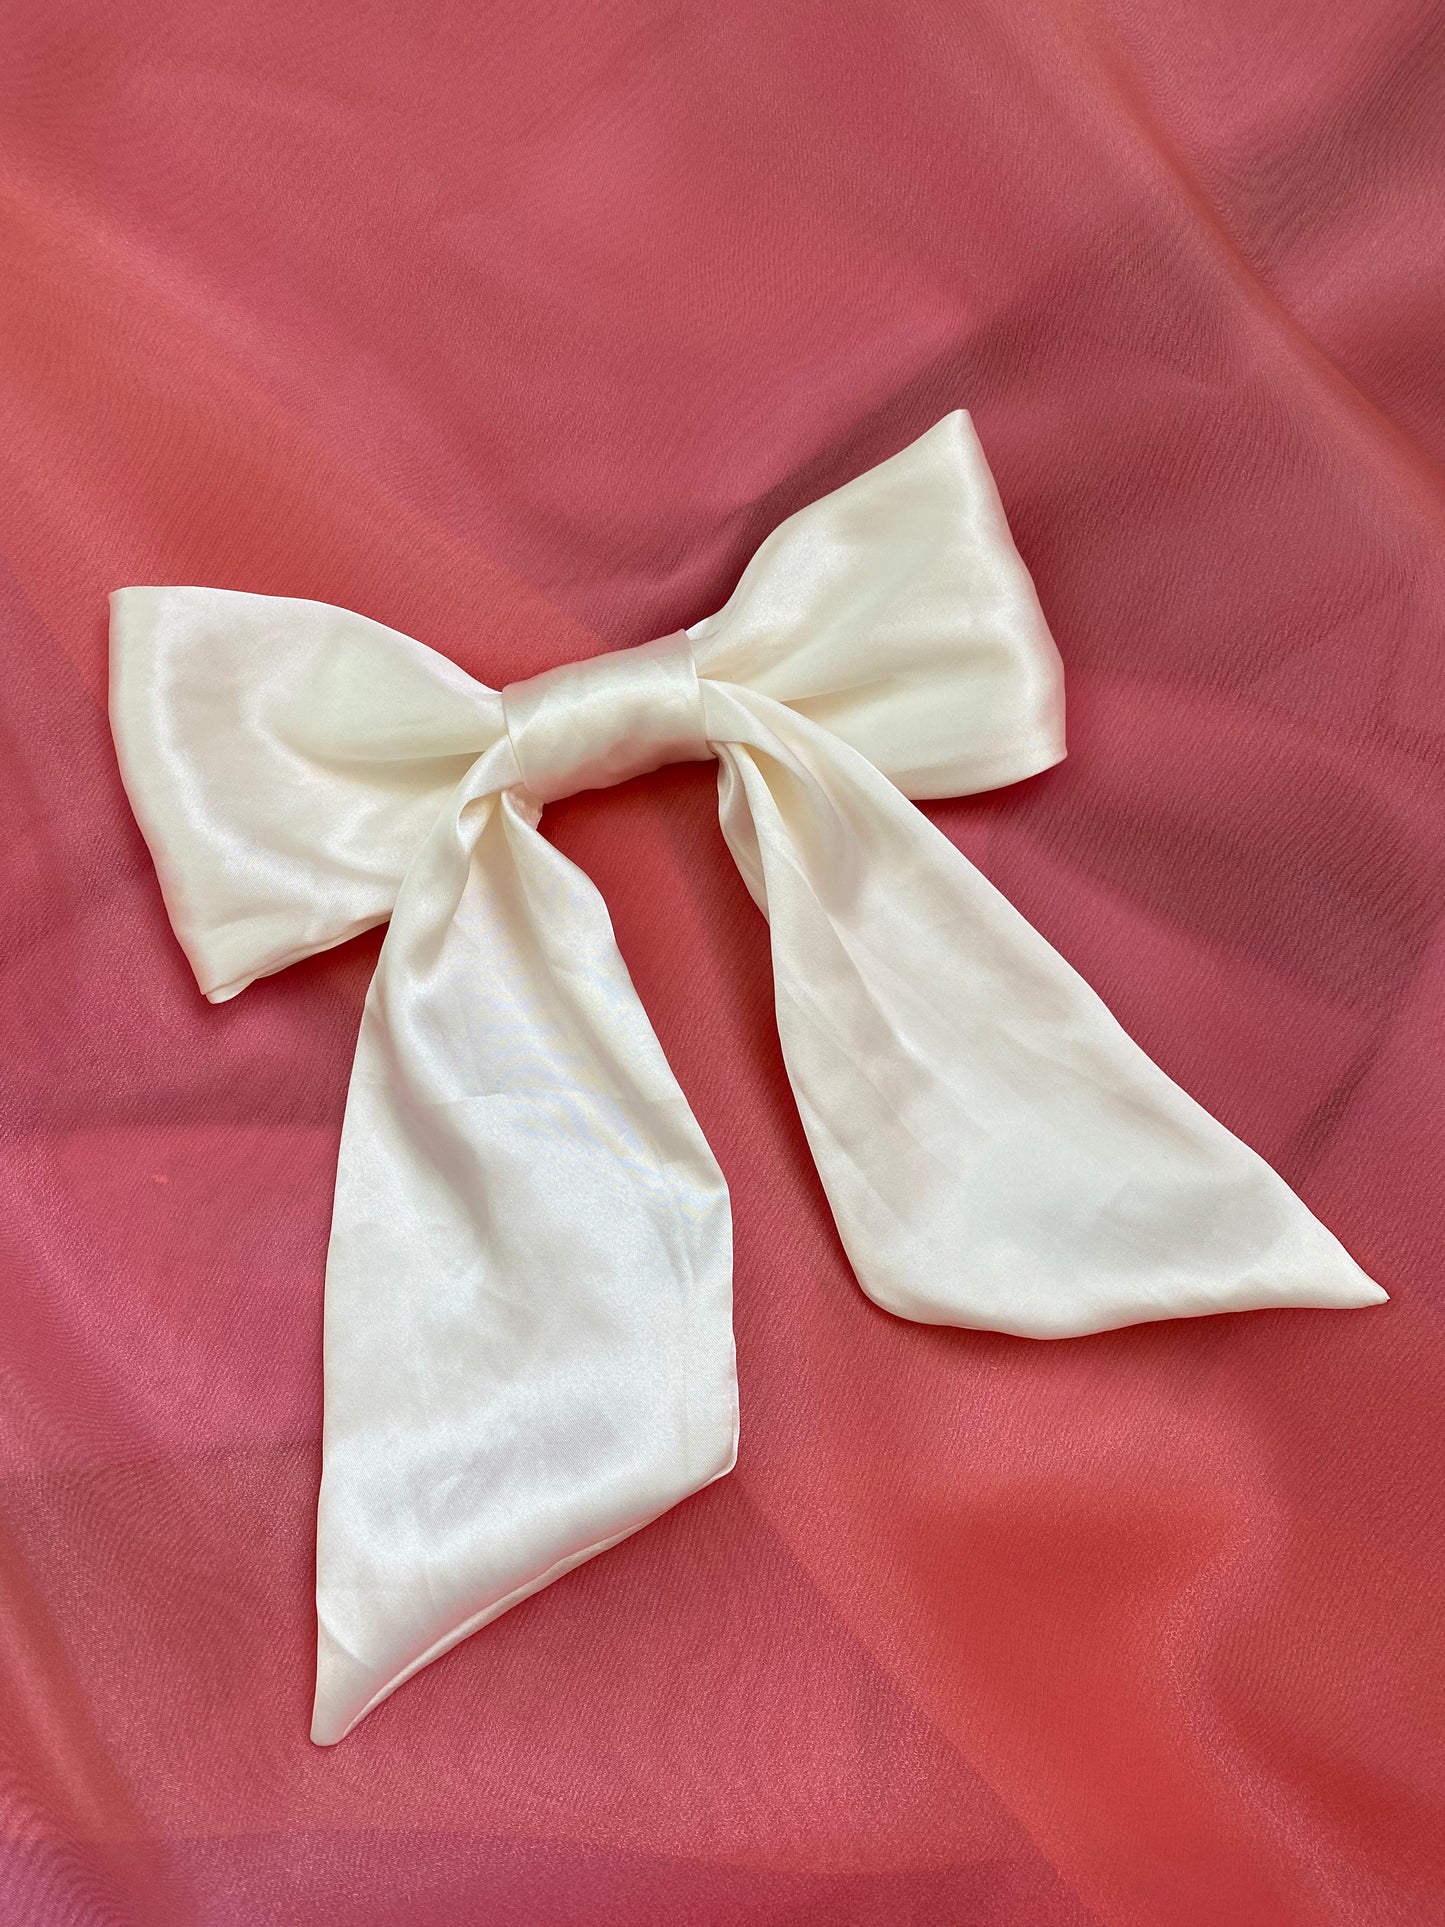 Giant Bow Clip - color options